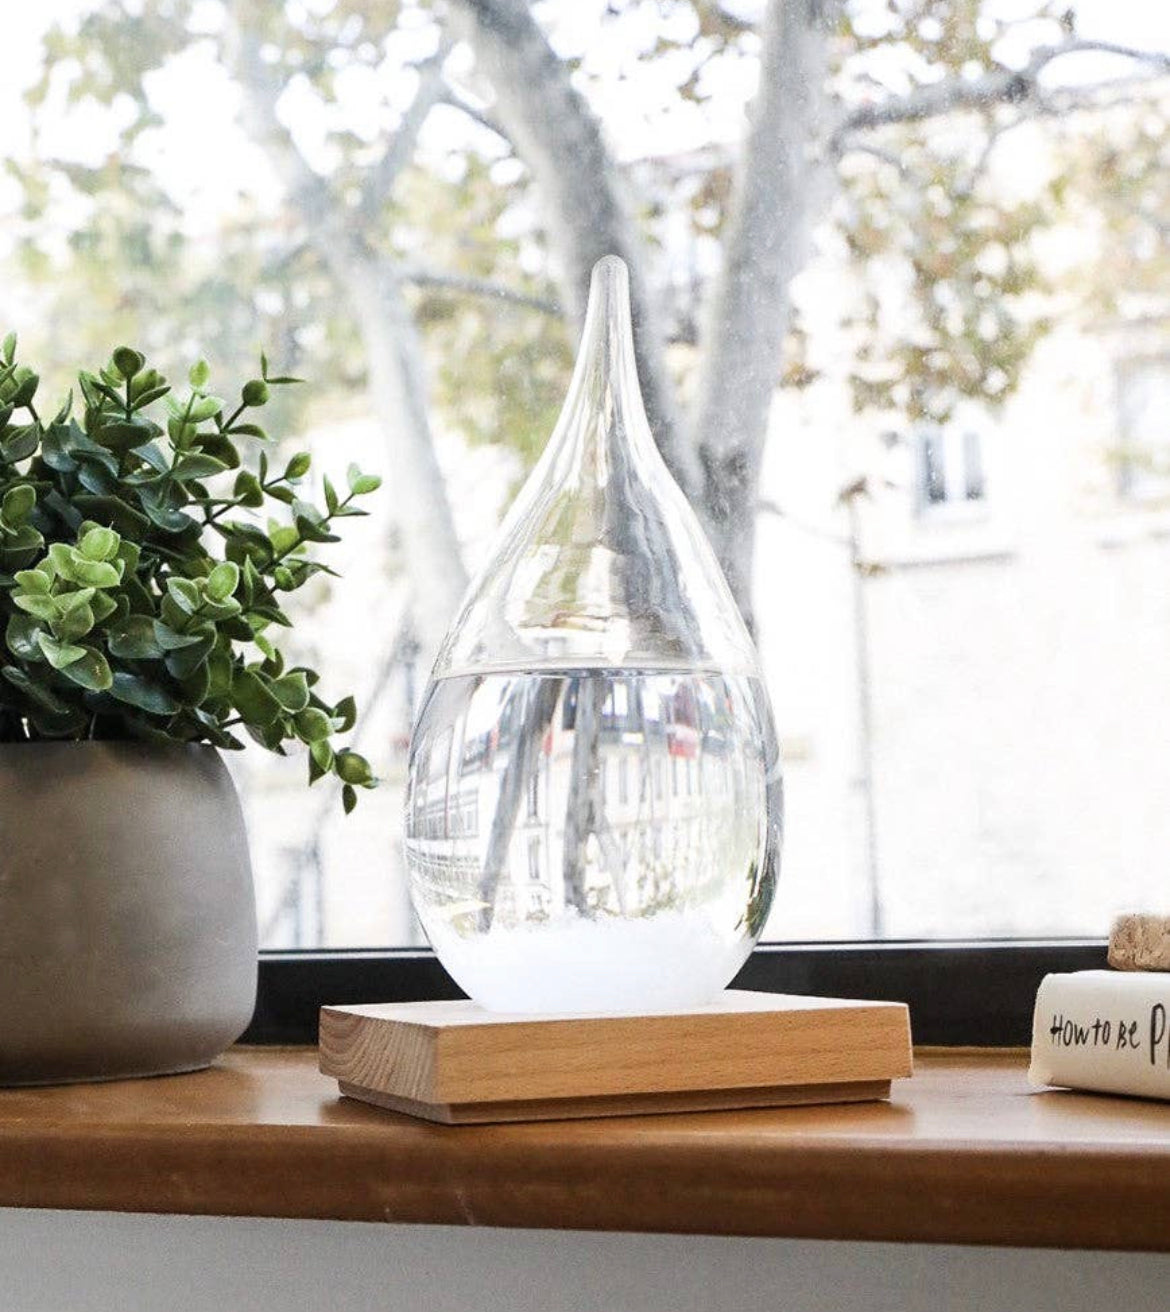 STORM GLASS WEATHER PREDICTION